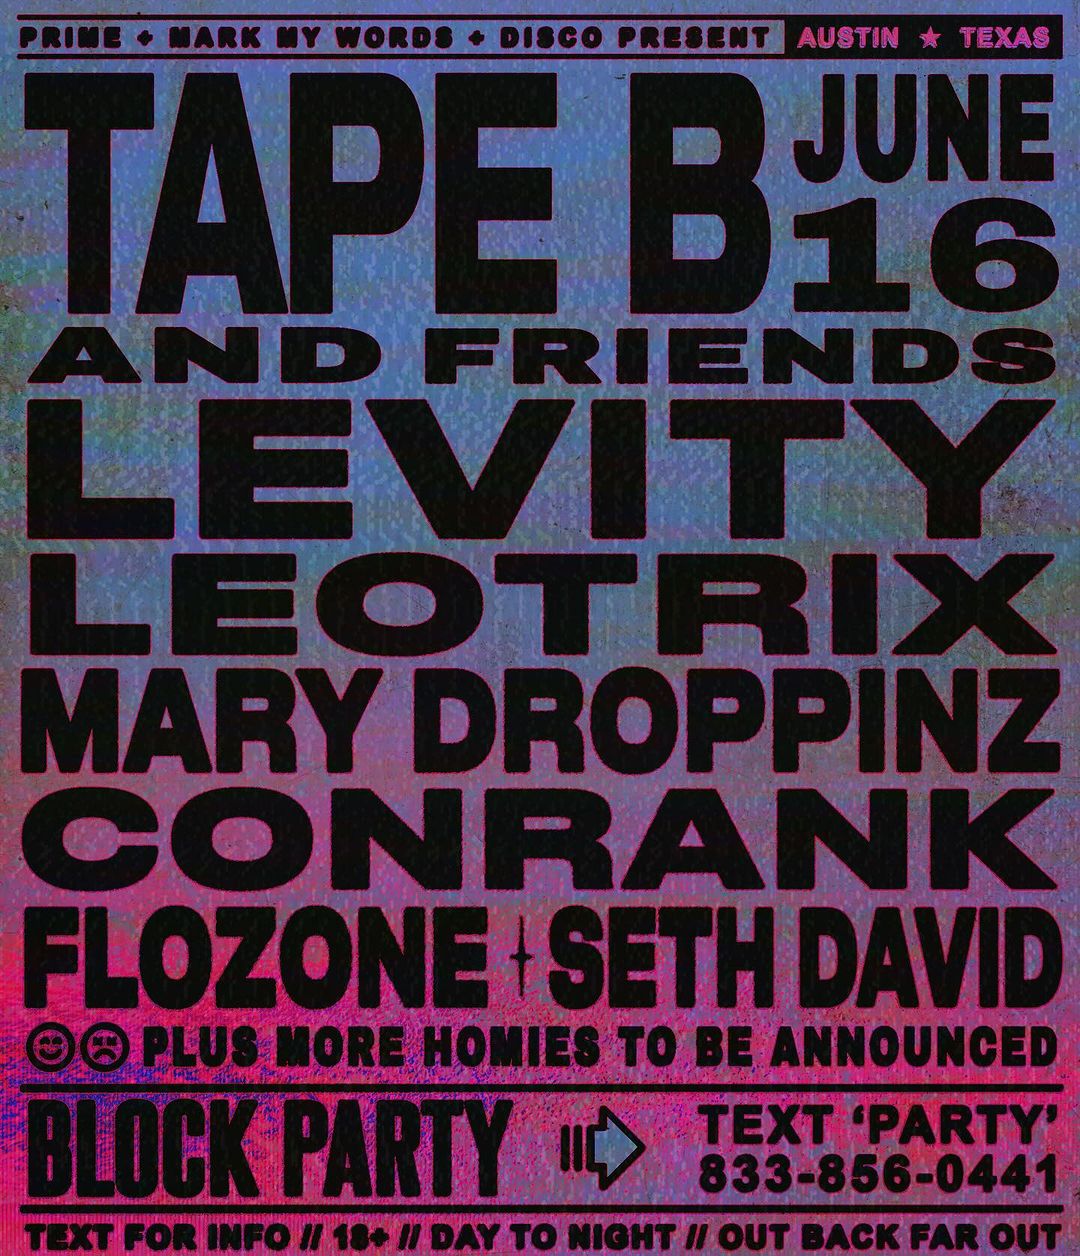 Tape B Announces Second “And Friends” Block Party In Texas edmnews